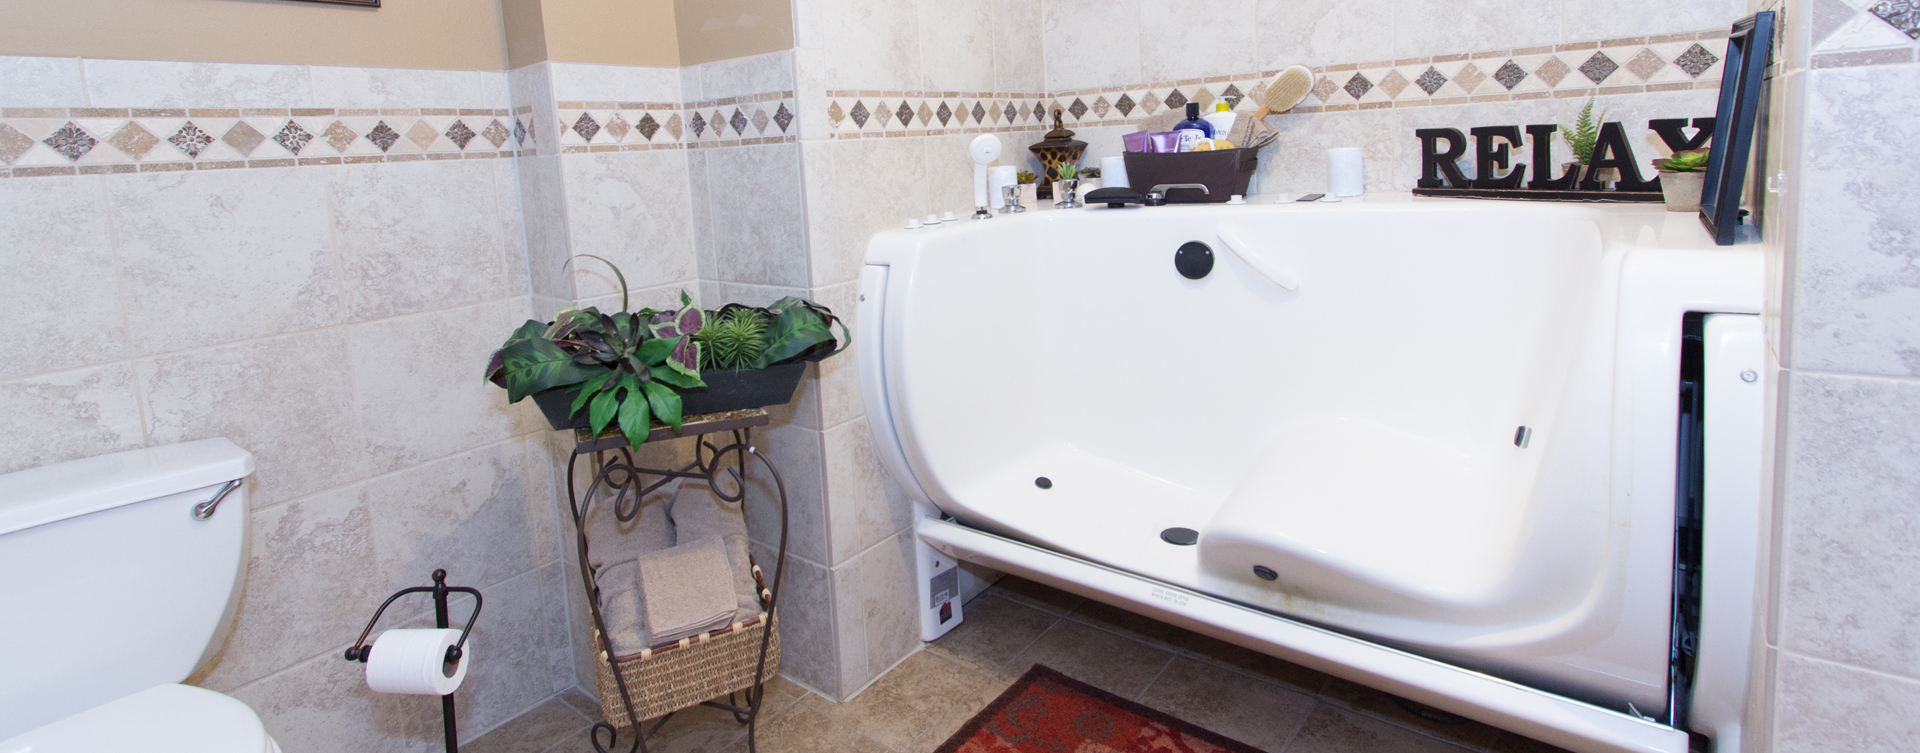 With an easy access design, our whirlpool allows you to enjoy a warm bath safely and comfortably at Bickford of Bourbonnais